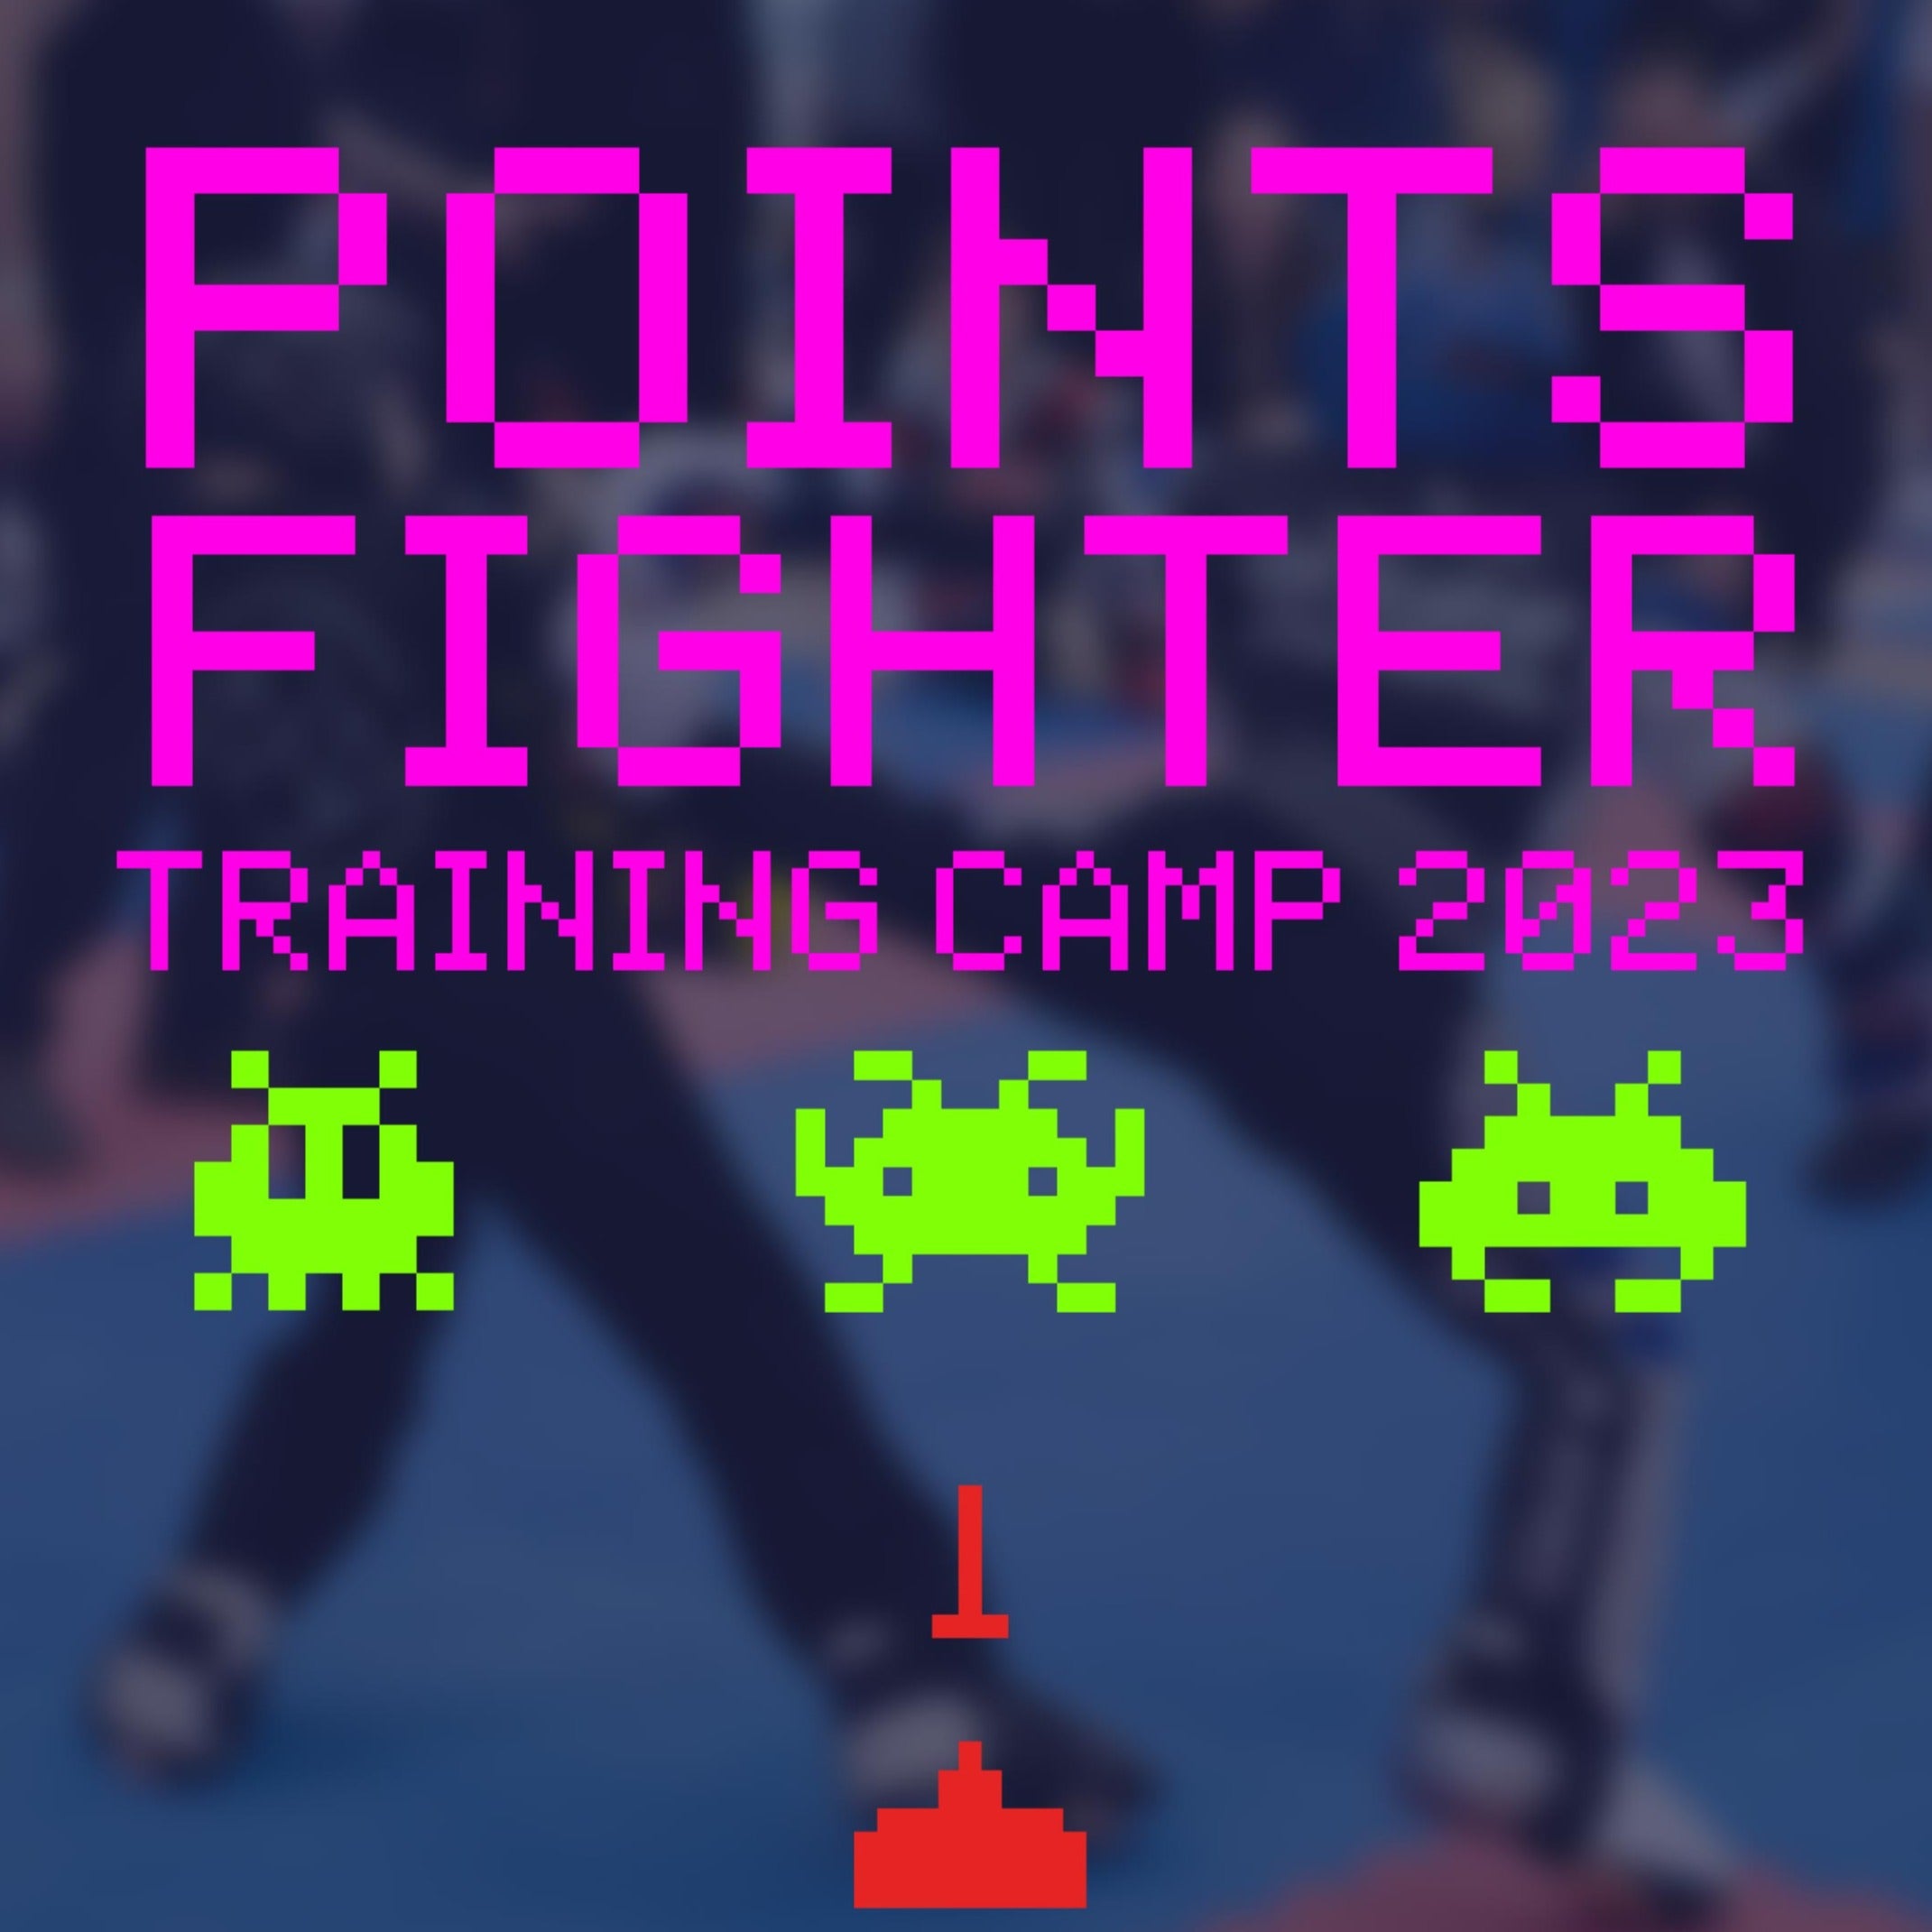 Points Fighter Training Camp 2023